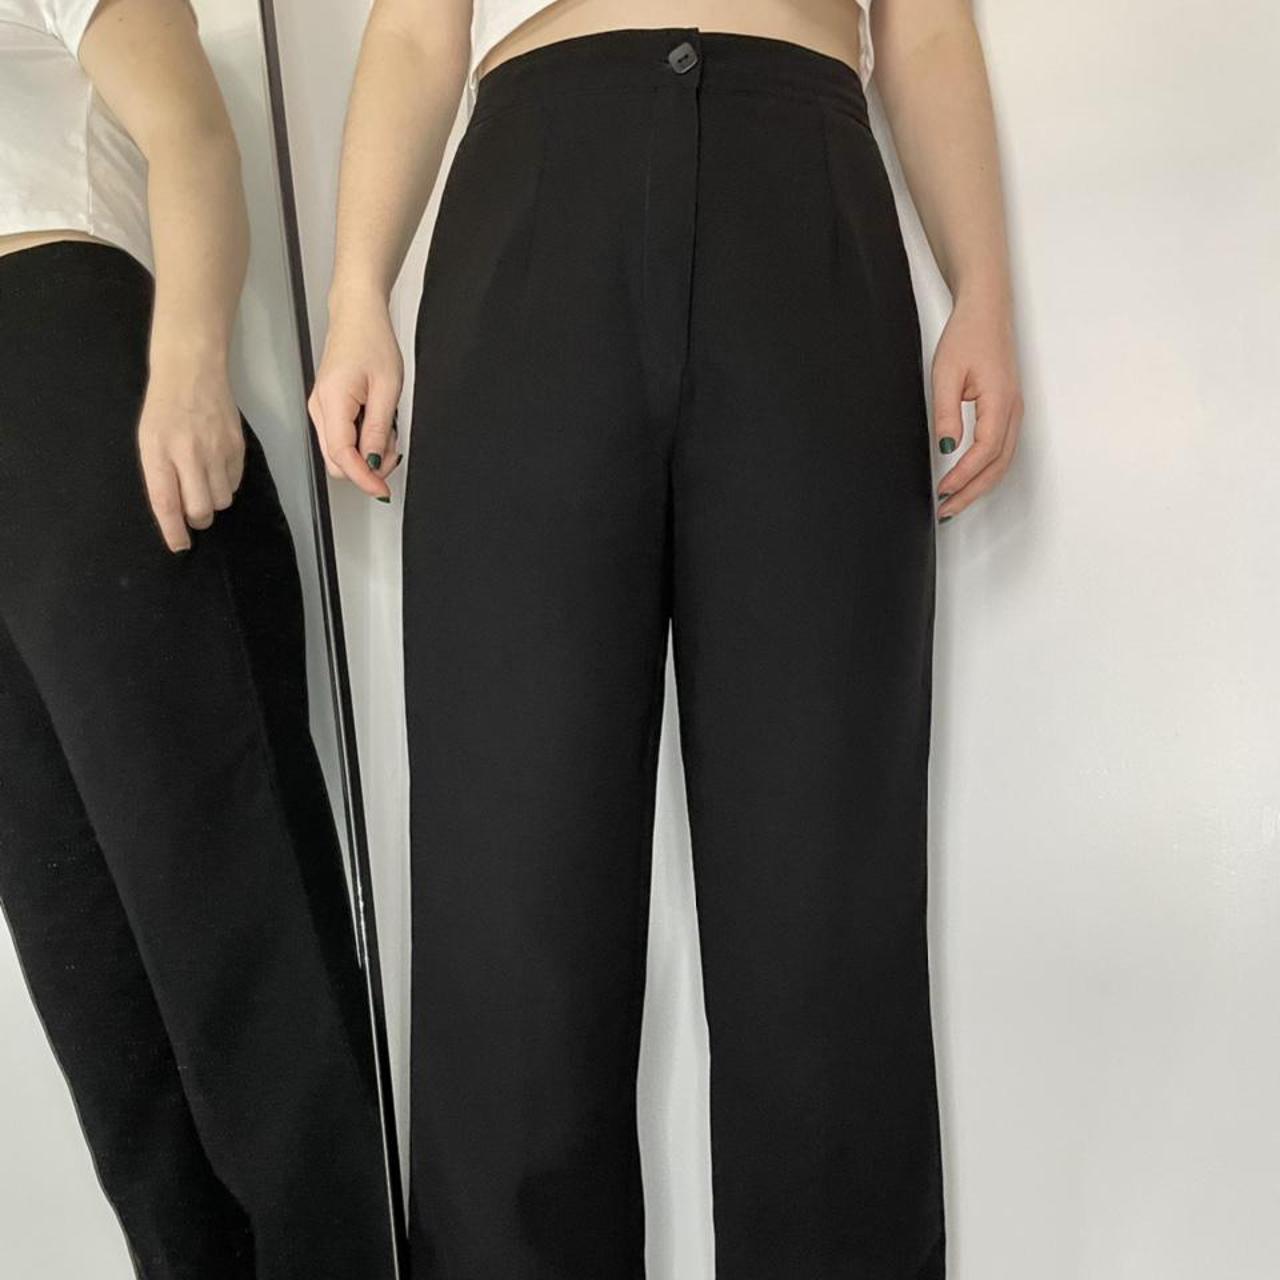 Product Image 1 - Petite black trousers

In excellent vintage